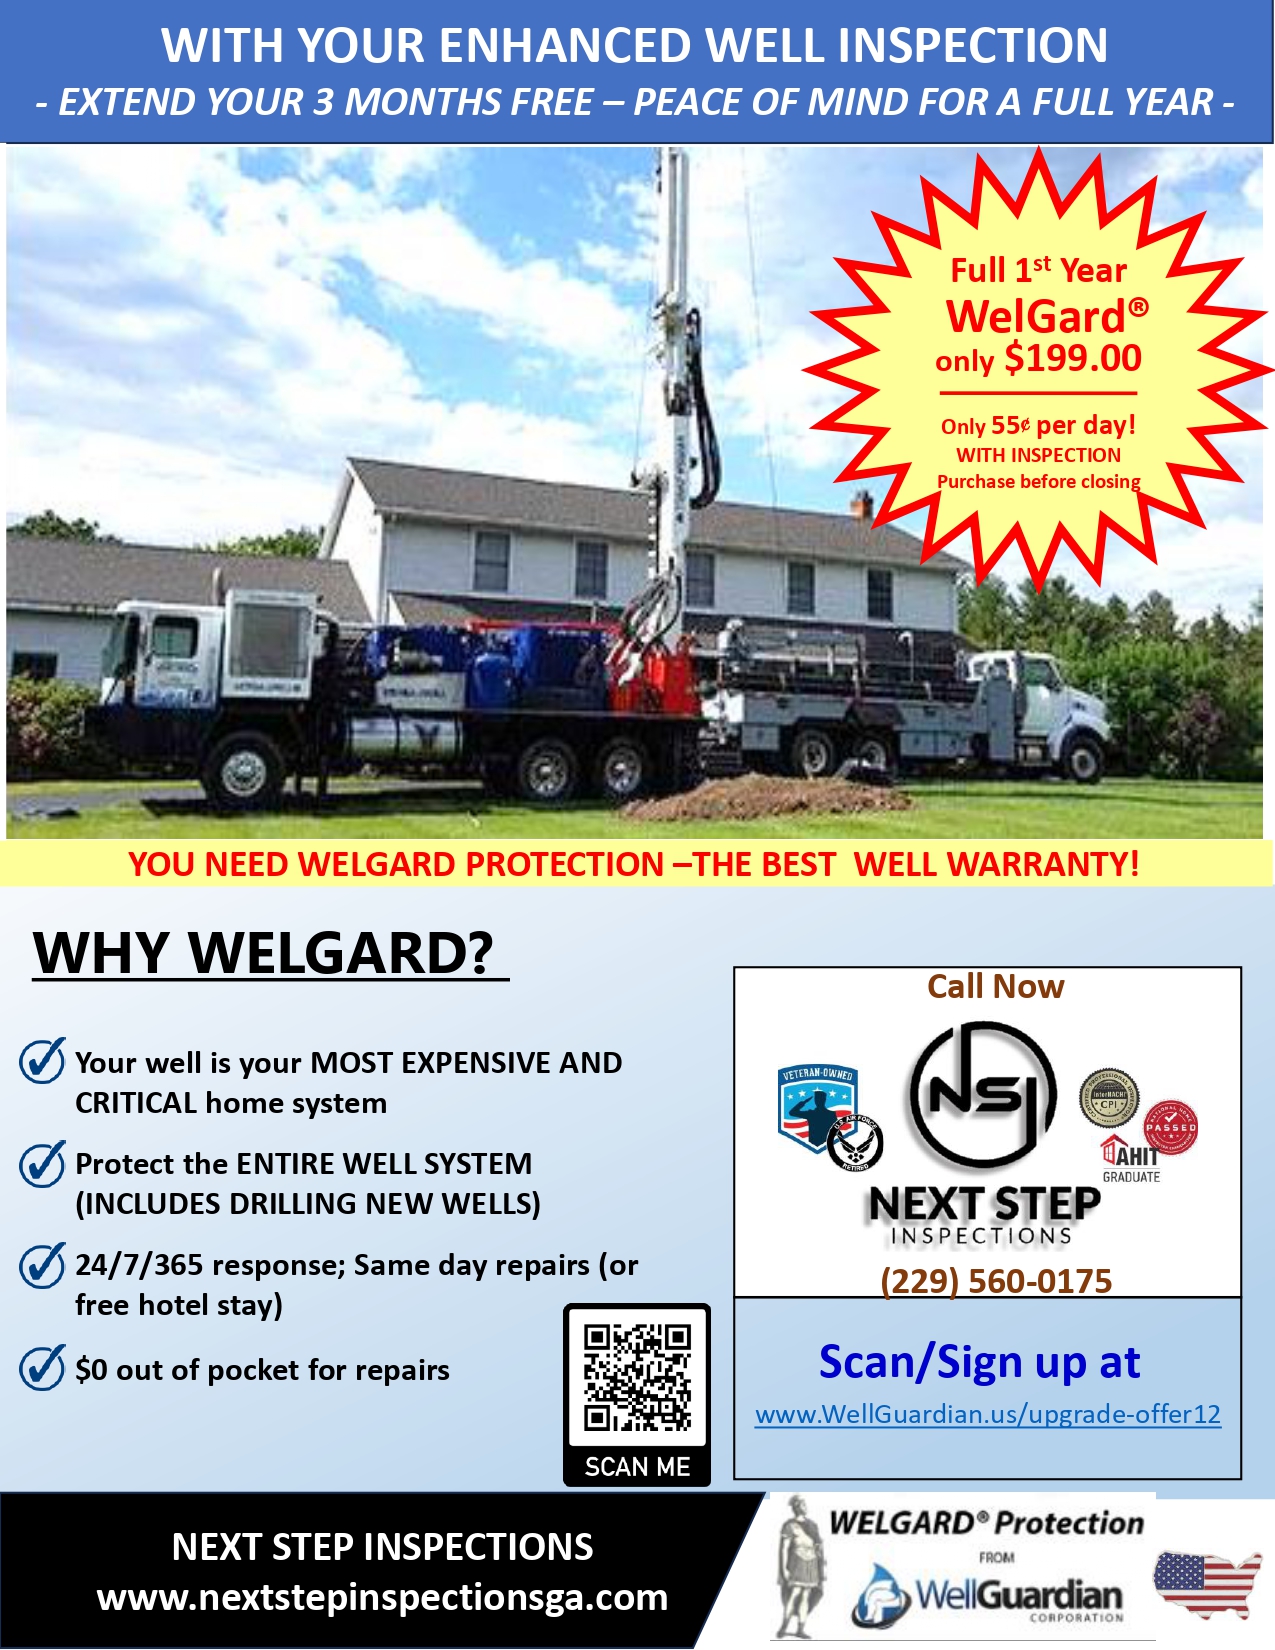 Secure your Home's Lifeline with a Comprehensive WelGard Warranty by Next Step Inspections